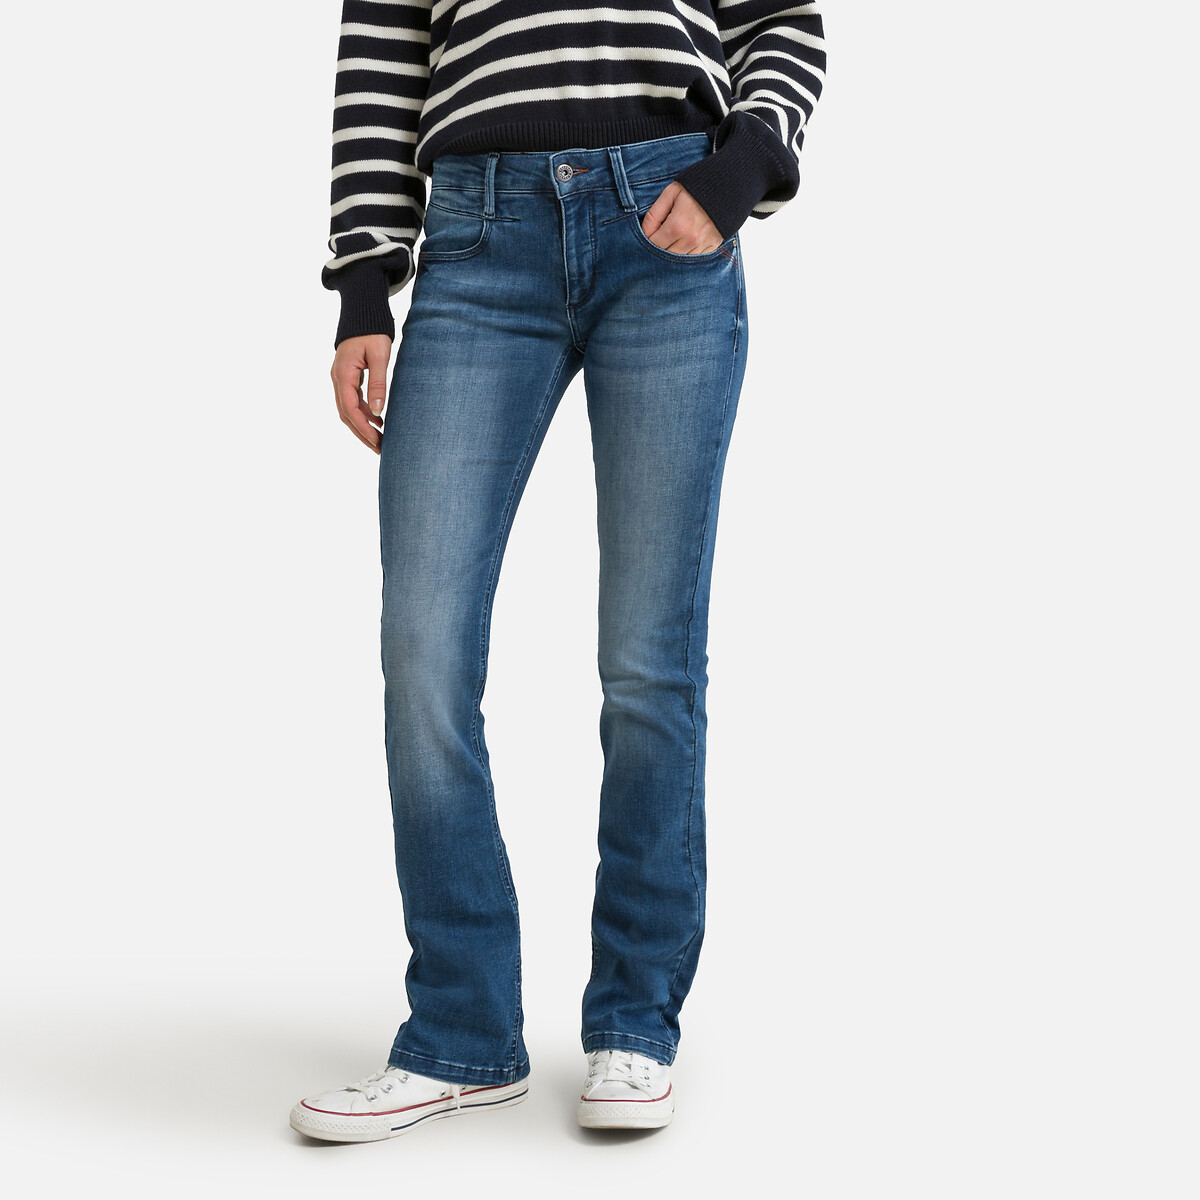 Betsy S-SDM Bootcut Jeans with High Waist